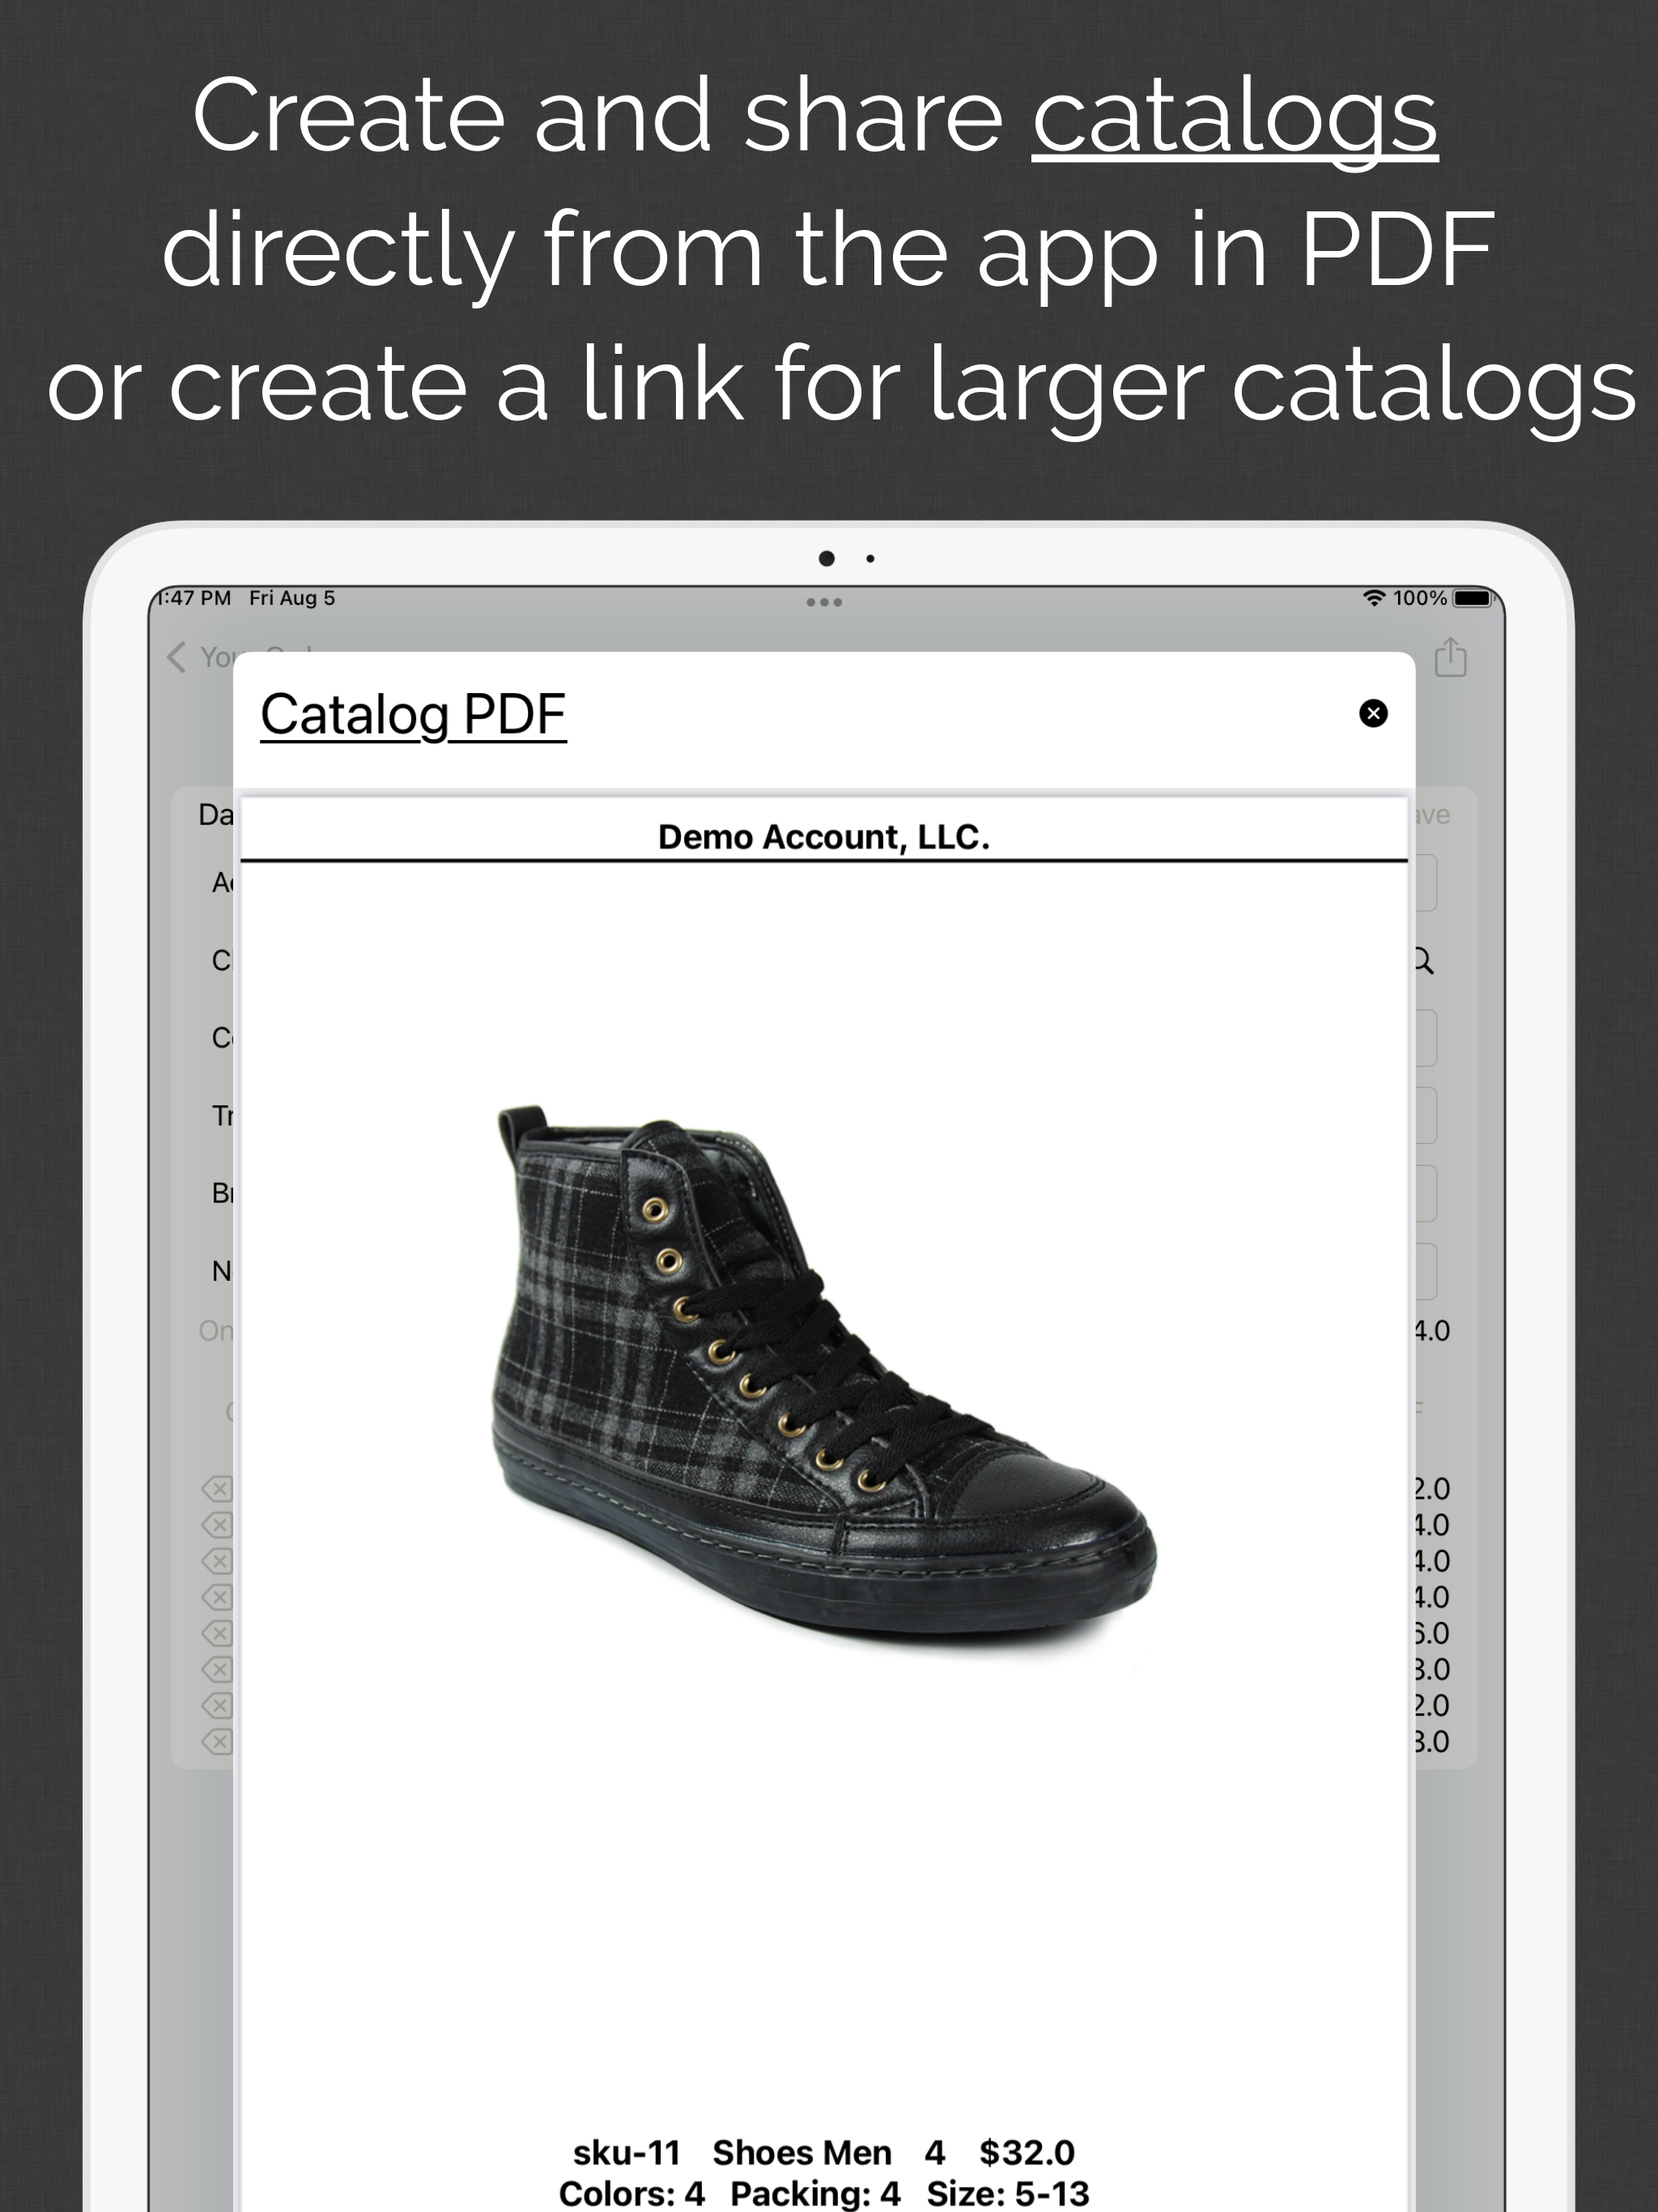 Create and share catalogs